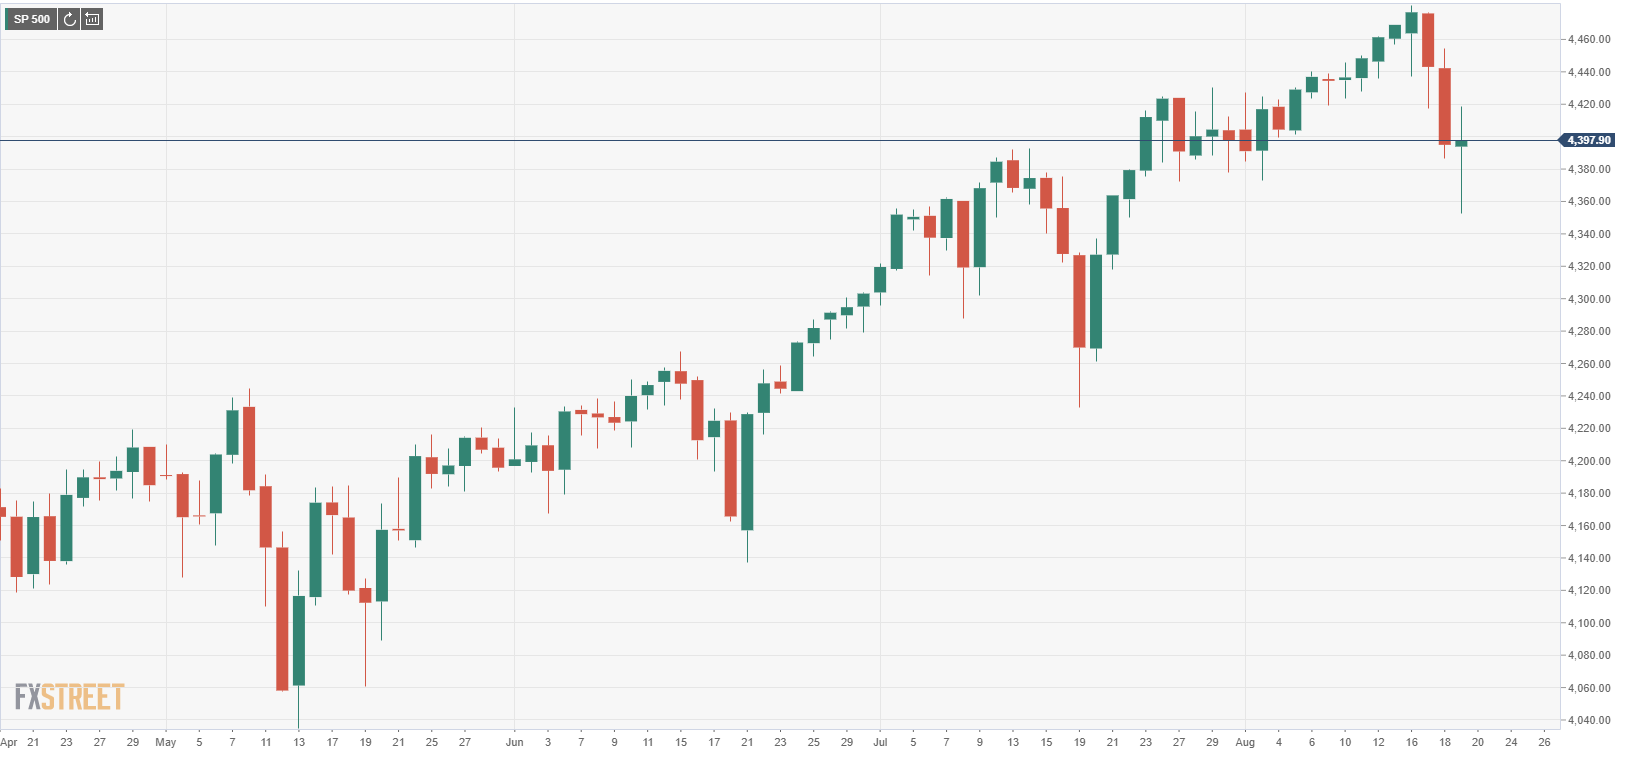 S&P 500 Index turned positive on the day above 4,400